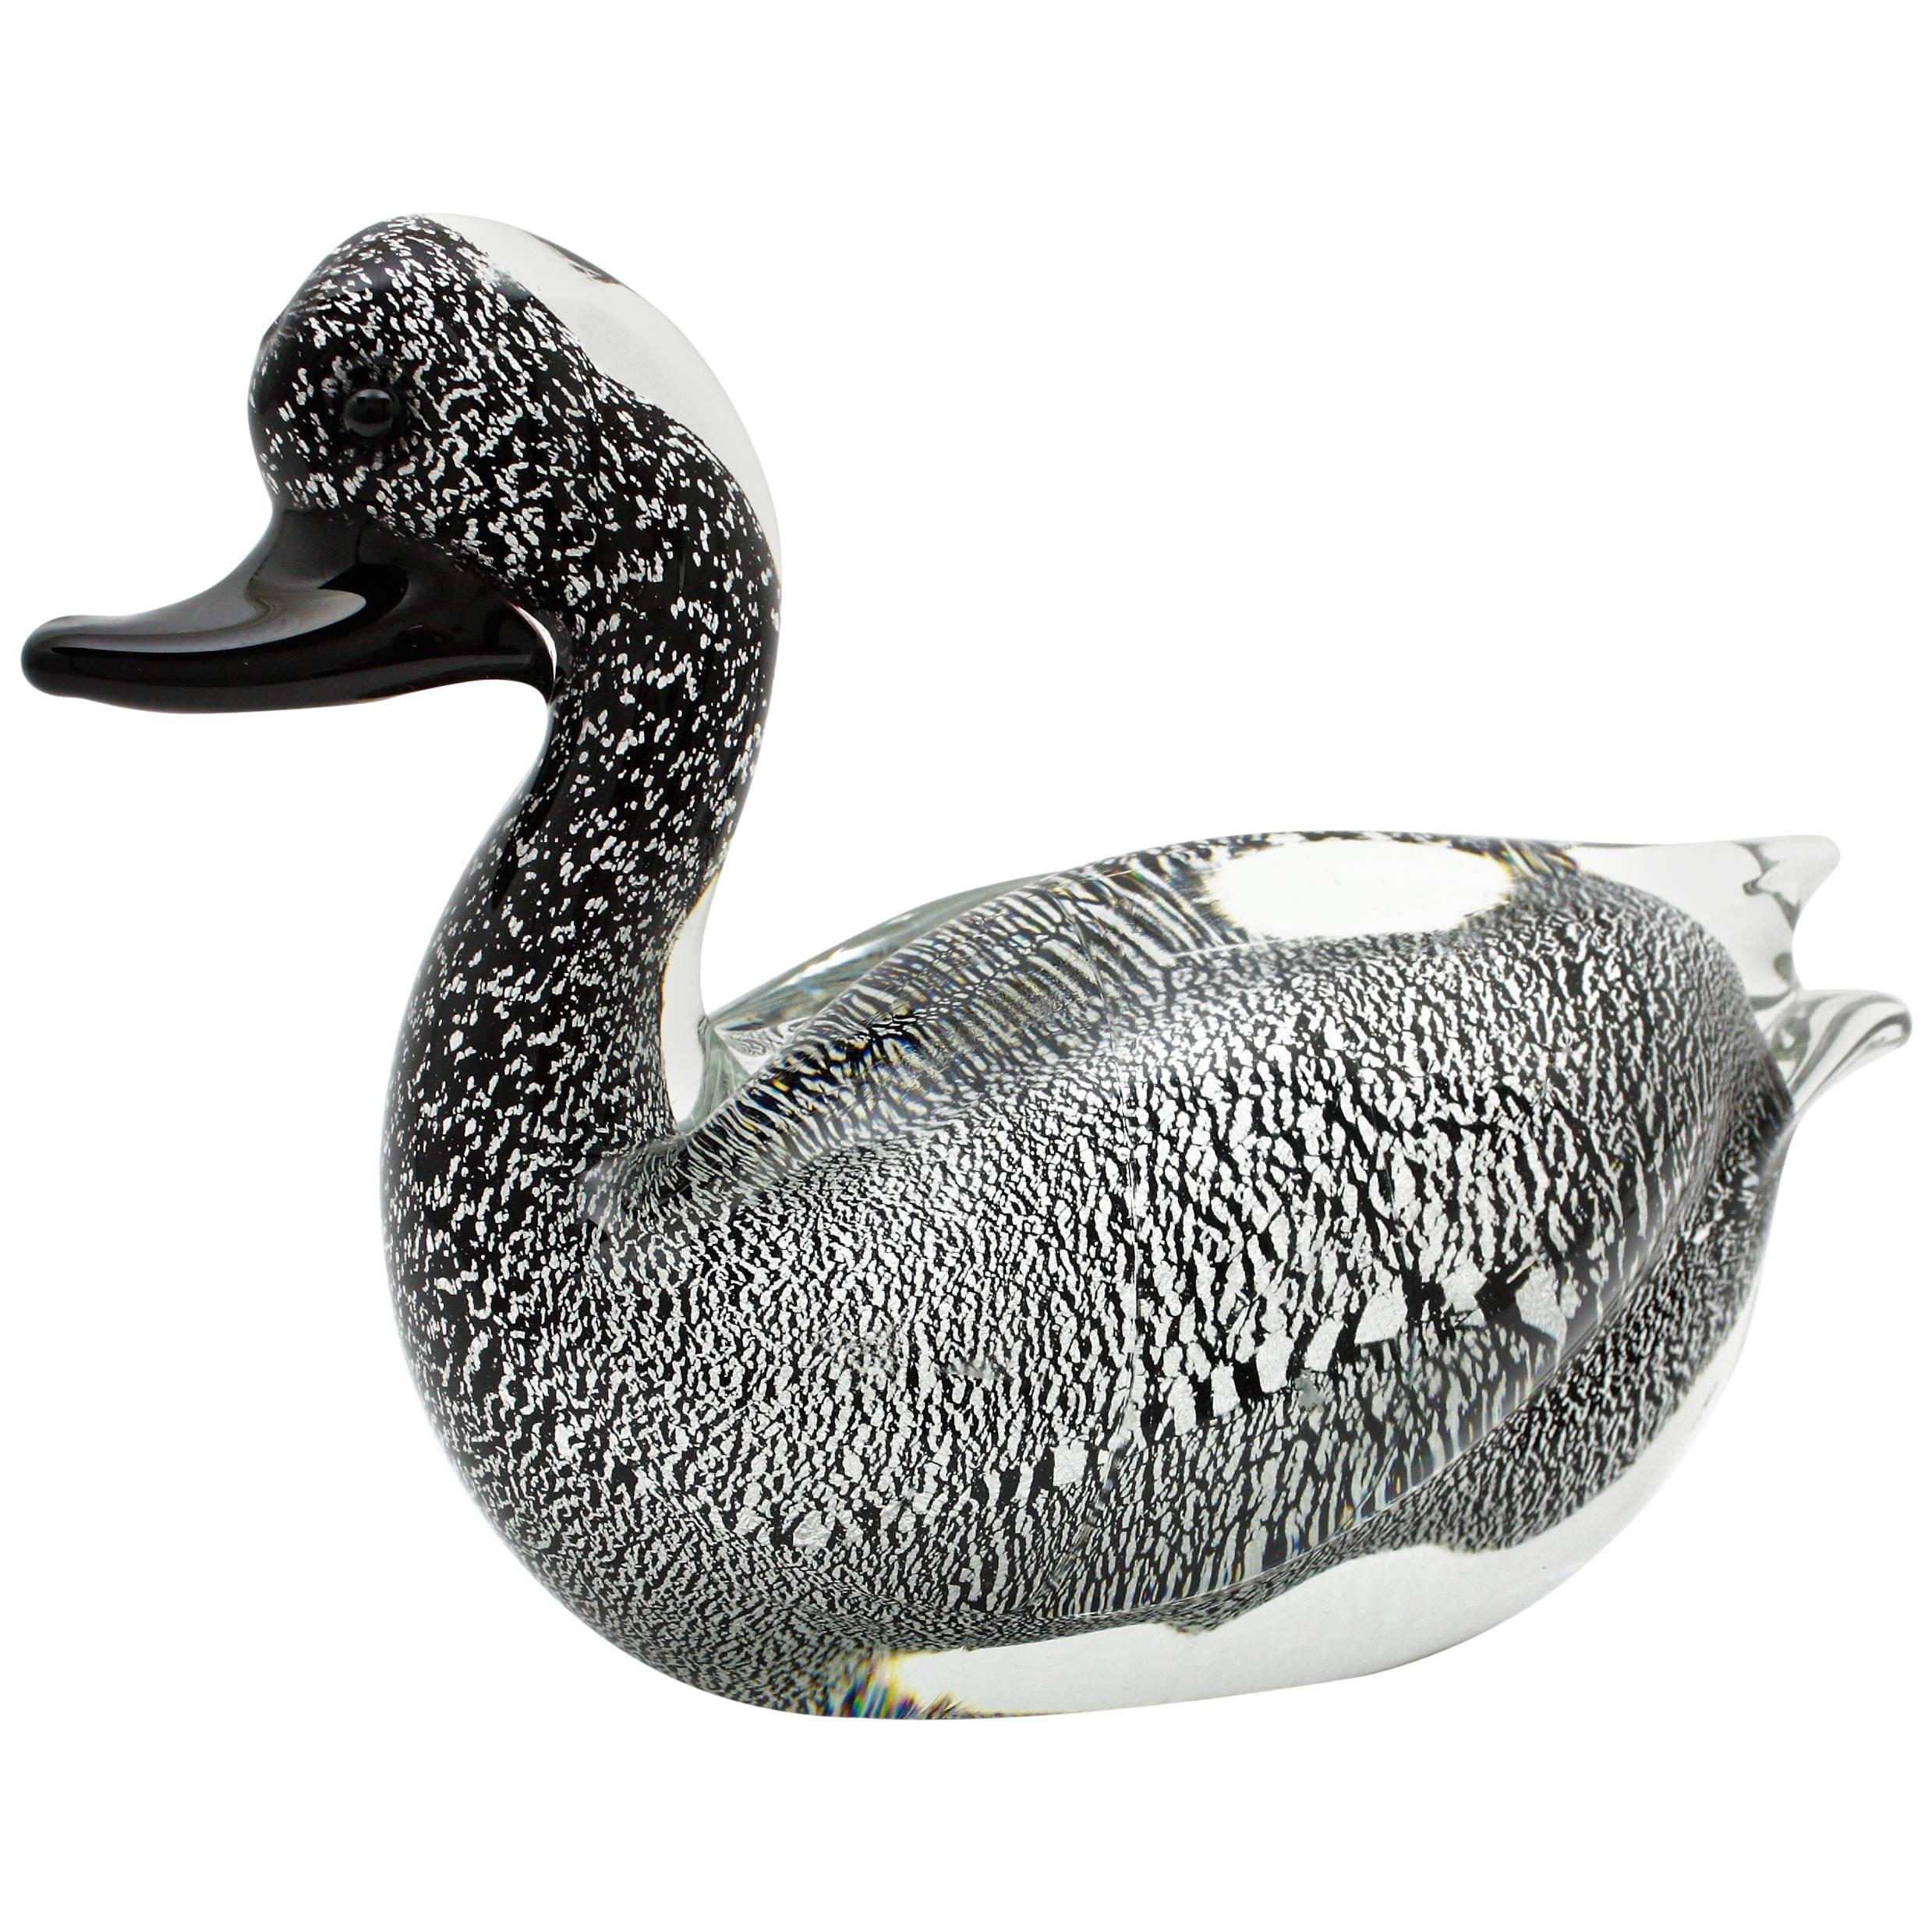  Murano Art Glass Silver Flecked Duck Figurine by Formia,  Italy, 1960s